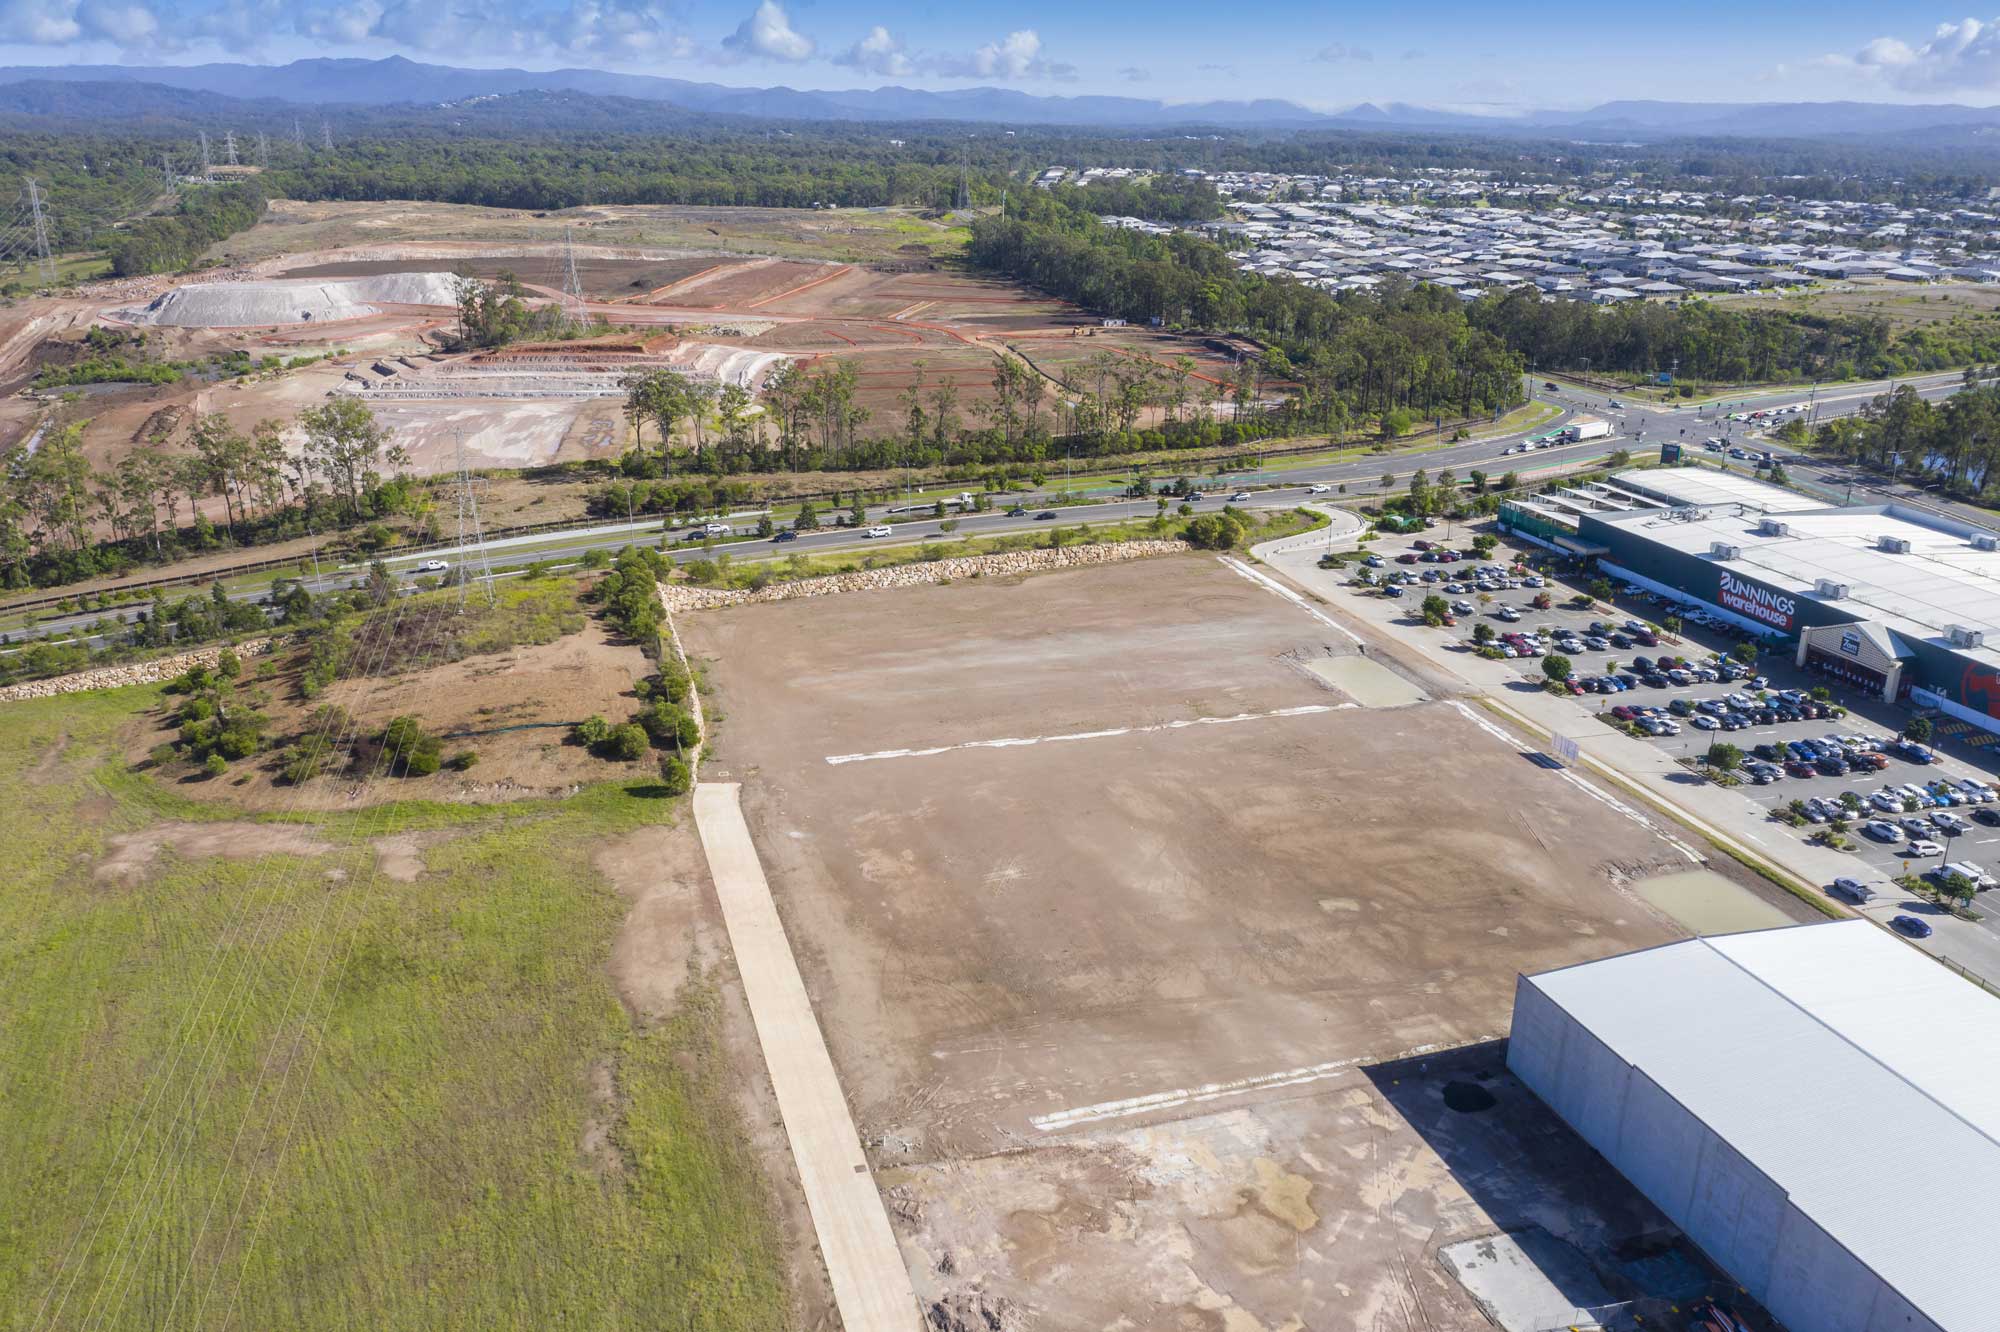 Drone photography for development site at Brendale, Brisbane